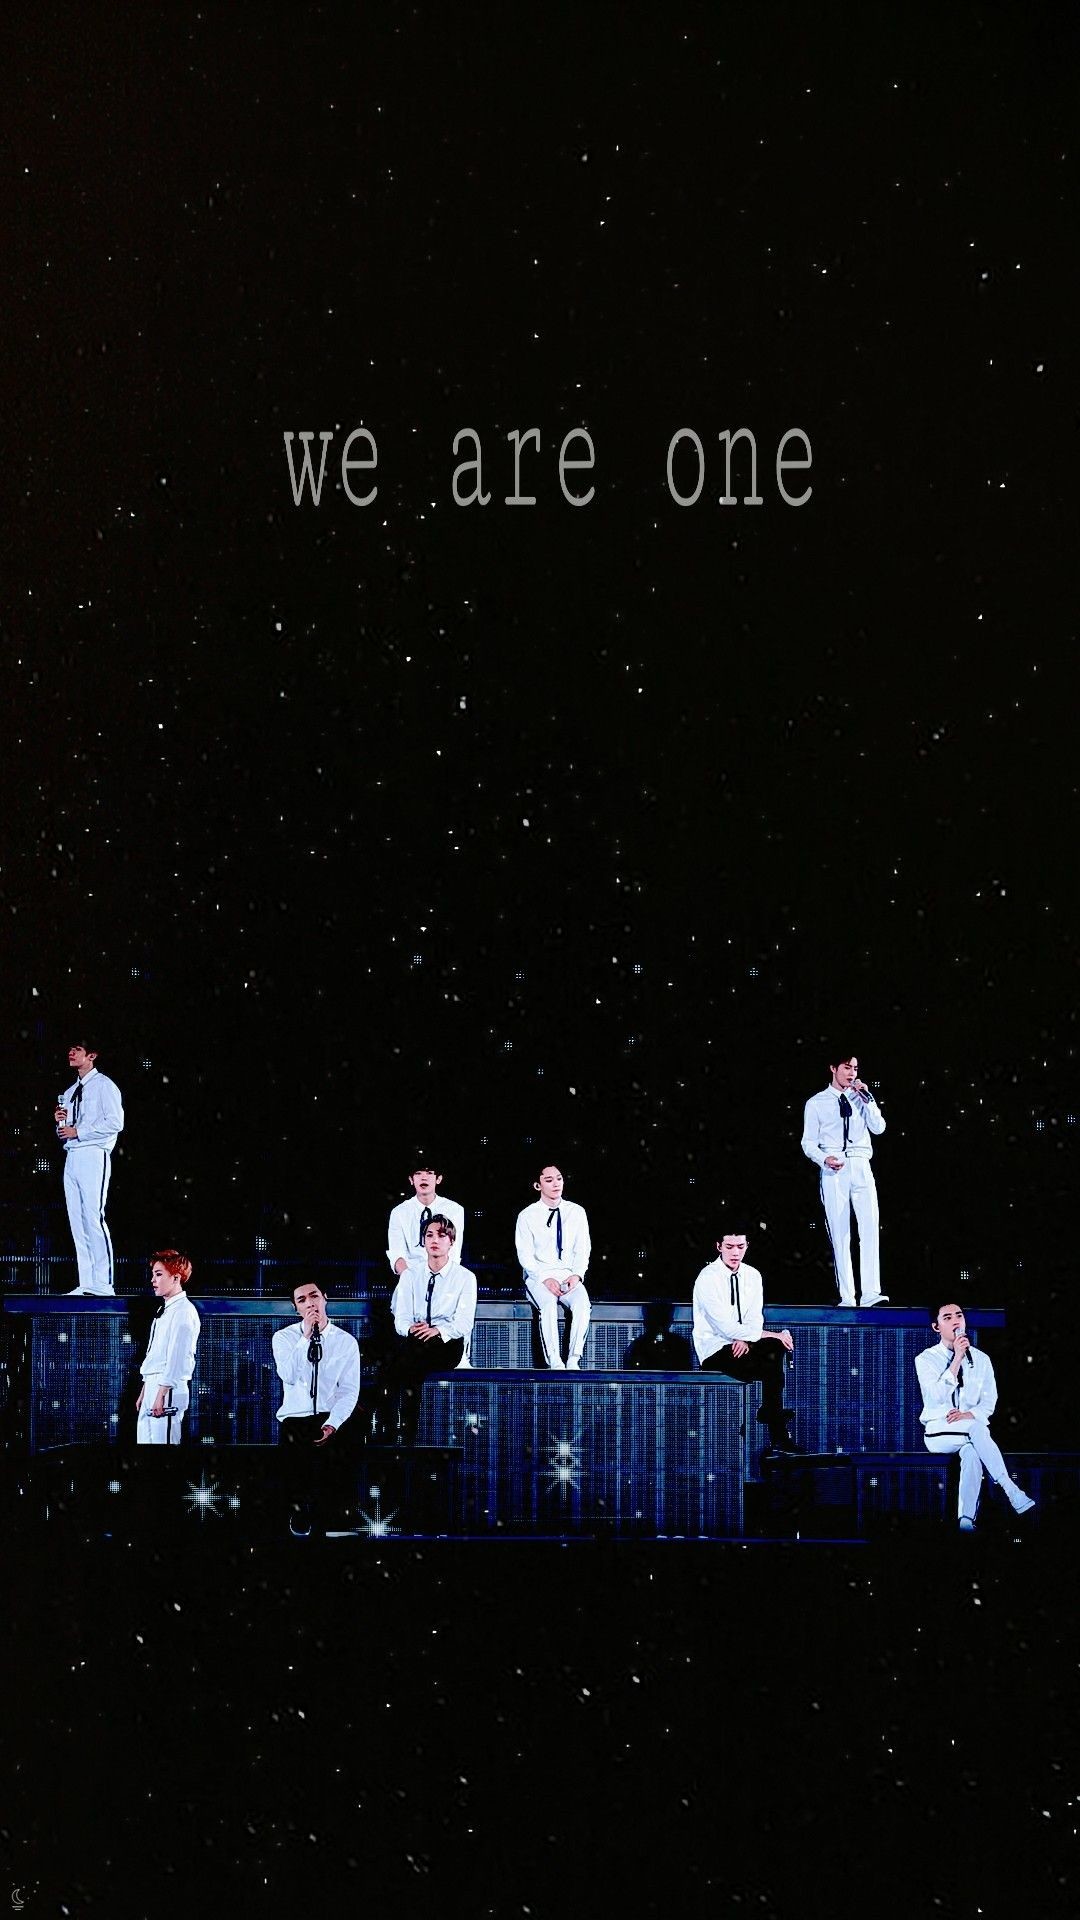 1080x1920, Exo We Are One Wallpaper Ìì Ë°°ê²½íë©´ - Wanna One Therefore Concert - HD Wallpaper 